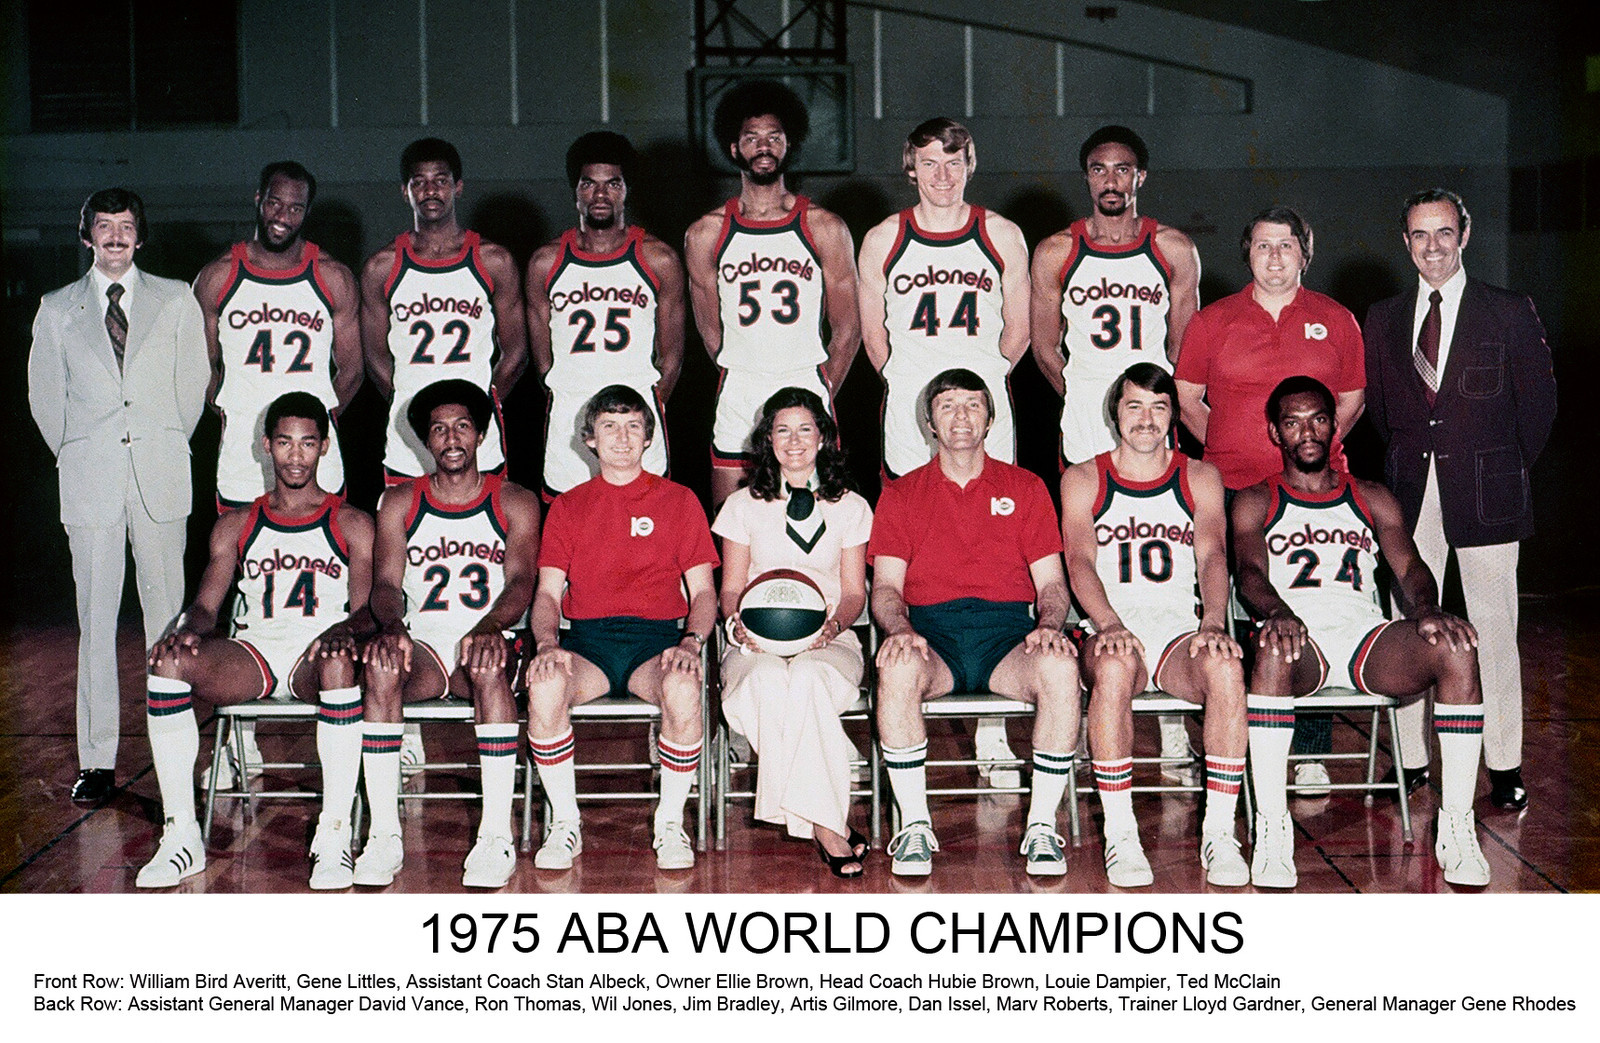 Remember the ABA: Spirits of St. Louis